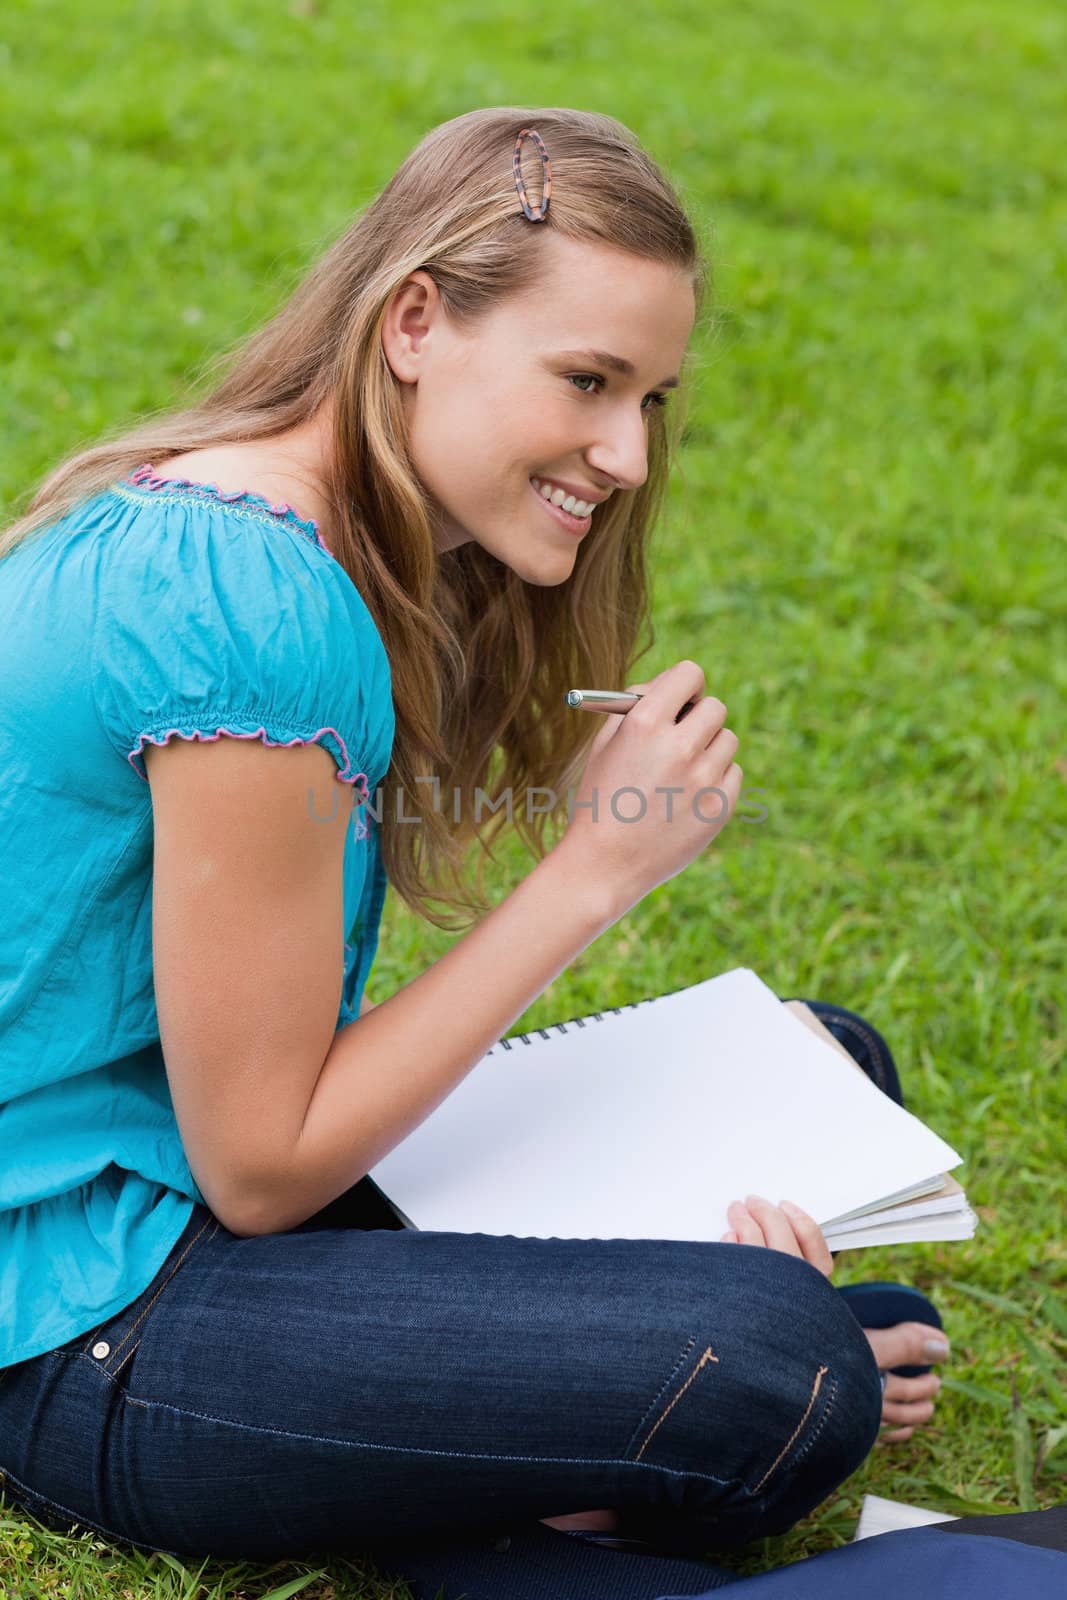 Young smiling girl looking towards the side while writing on her by Wavebreakmedia